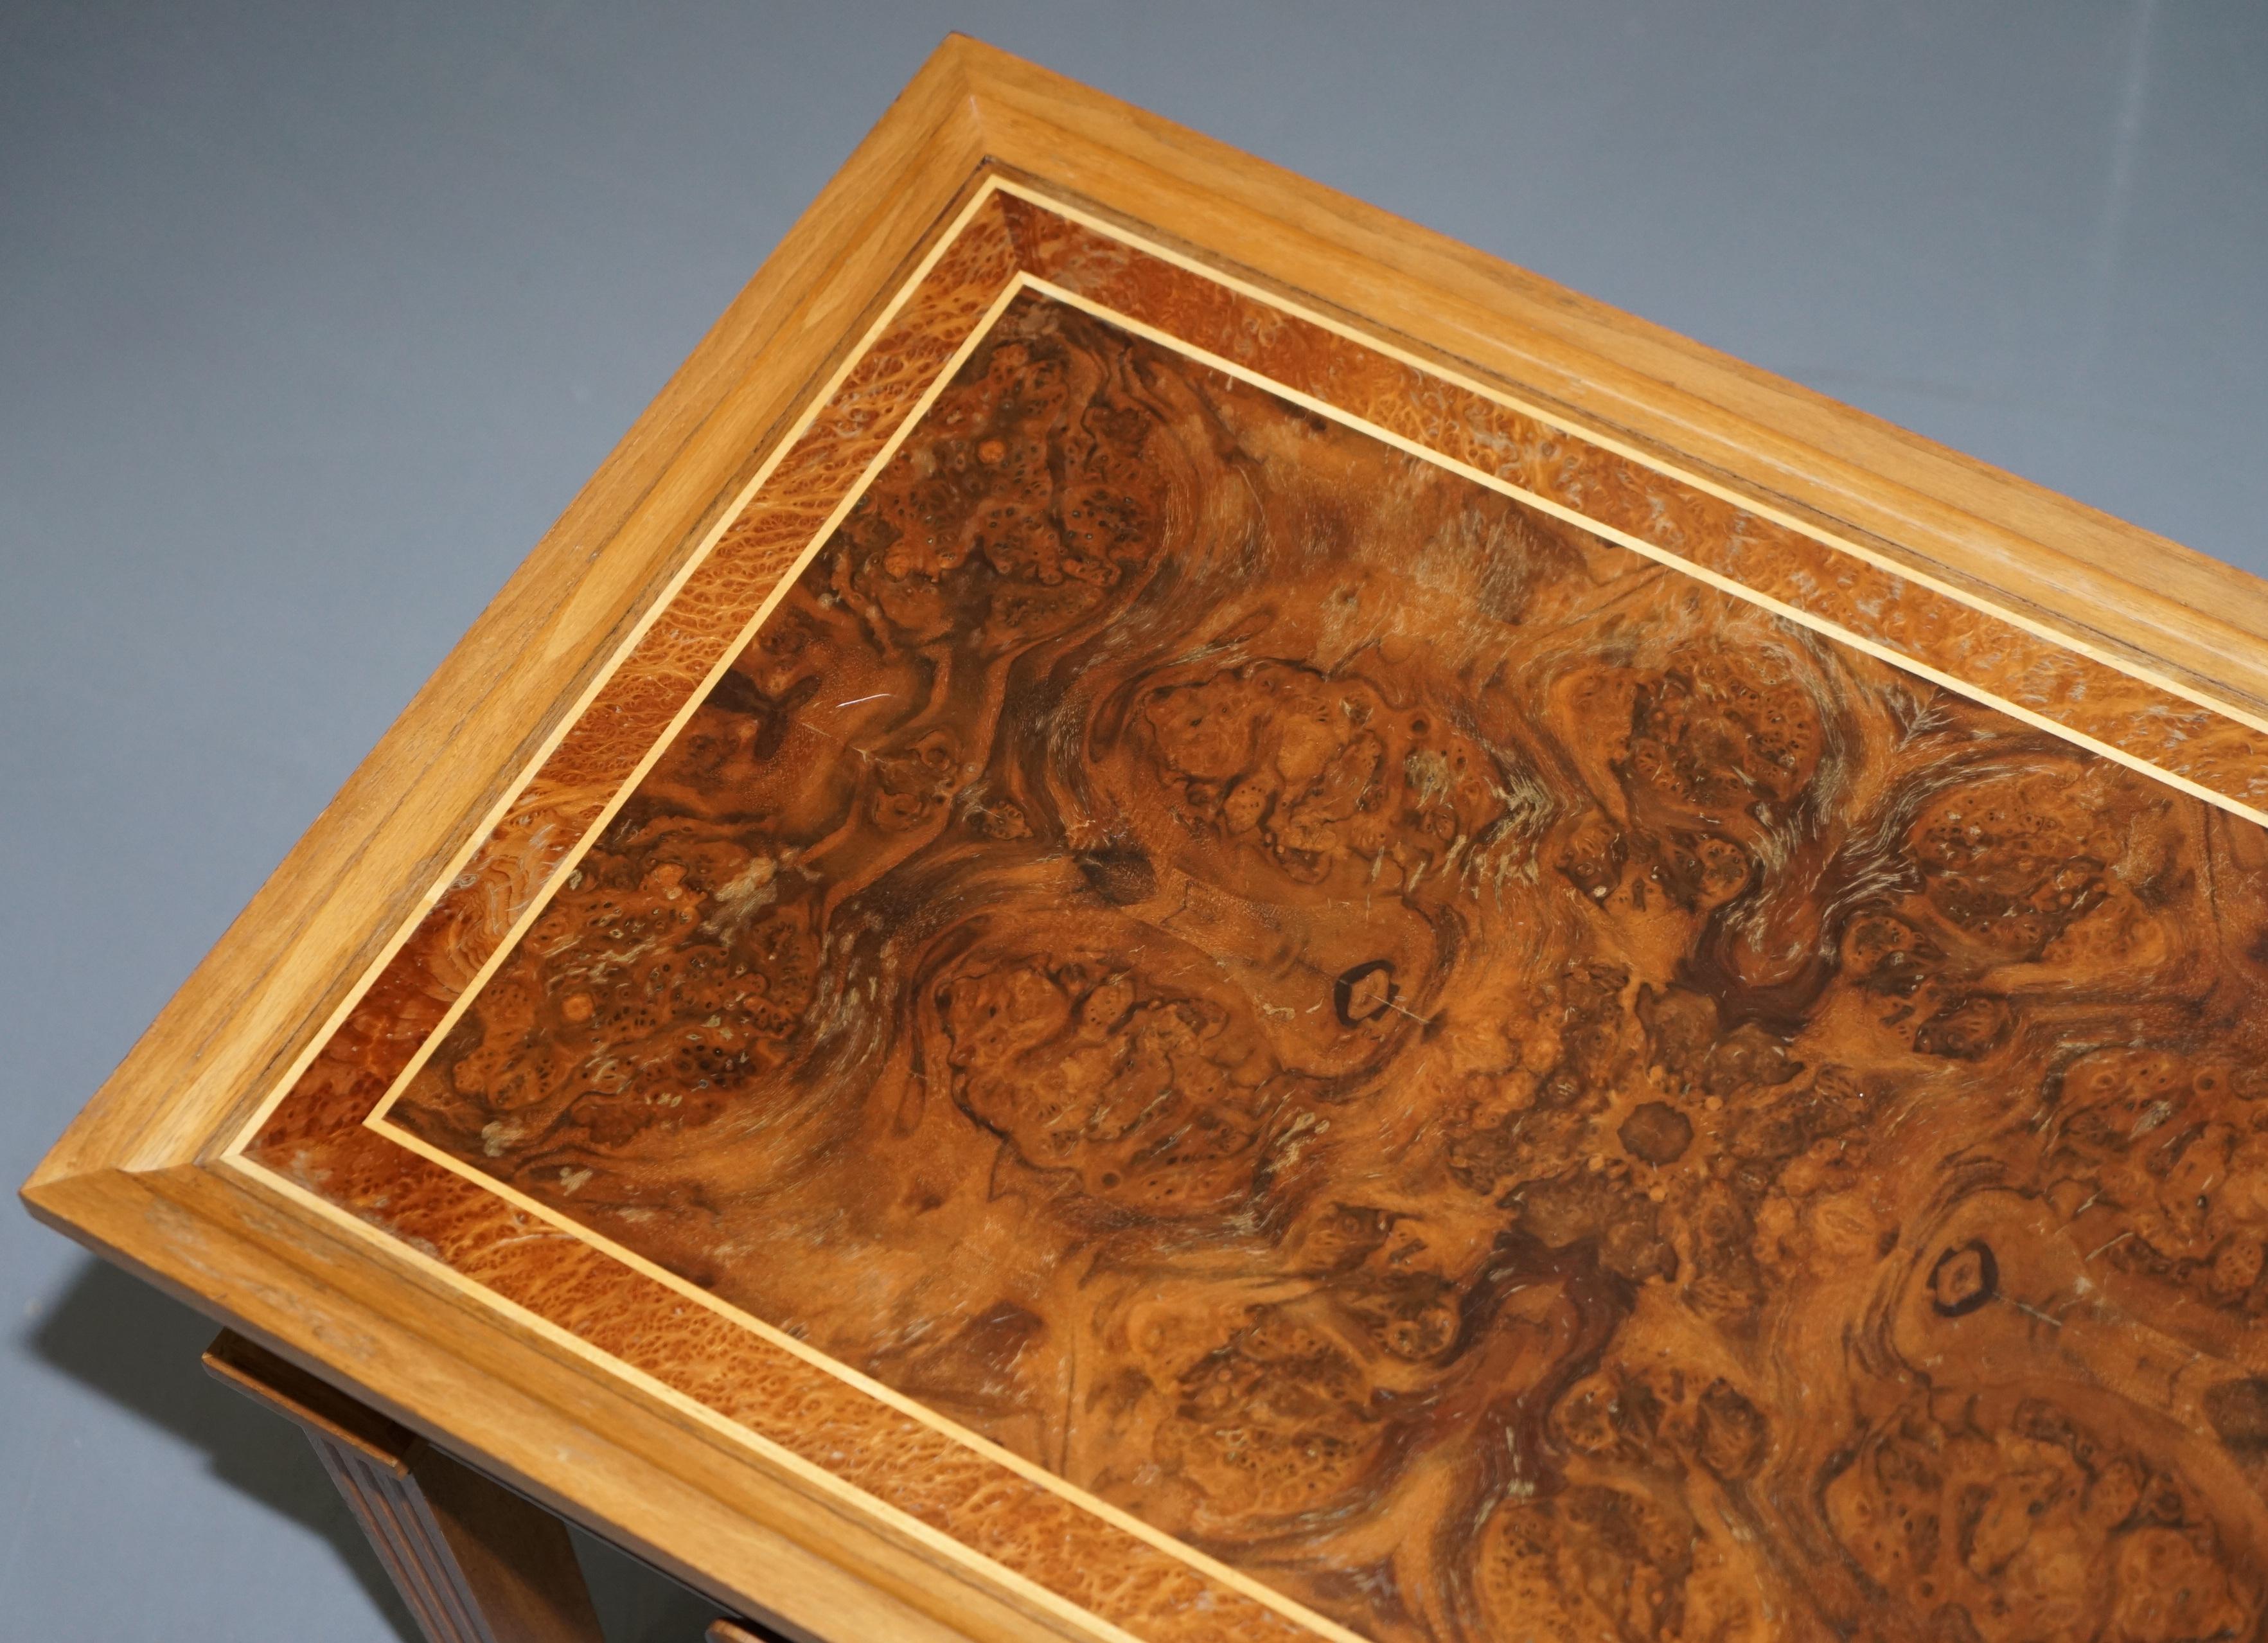 Hand-Crafted Stunning Burr Walnut Kidney Desk Built in Bookcase Shelf Brown Leather Surface